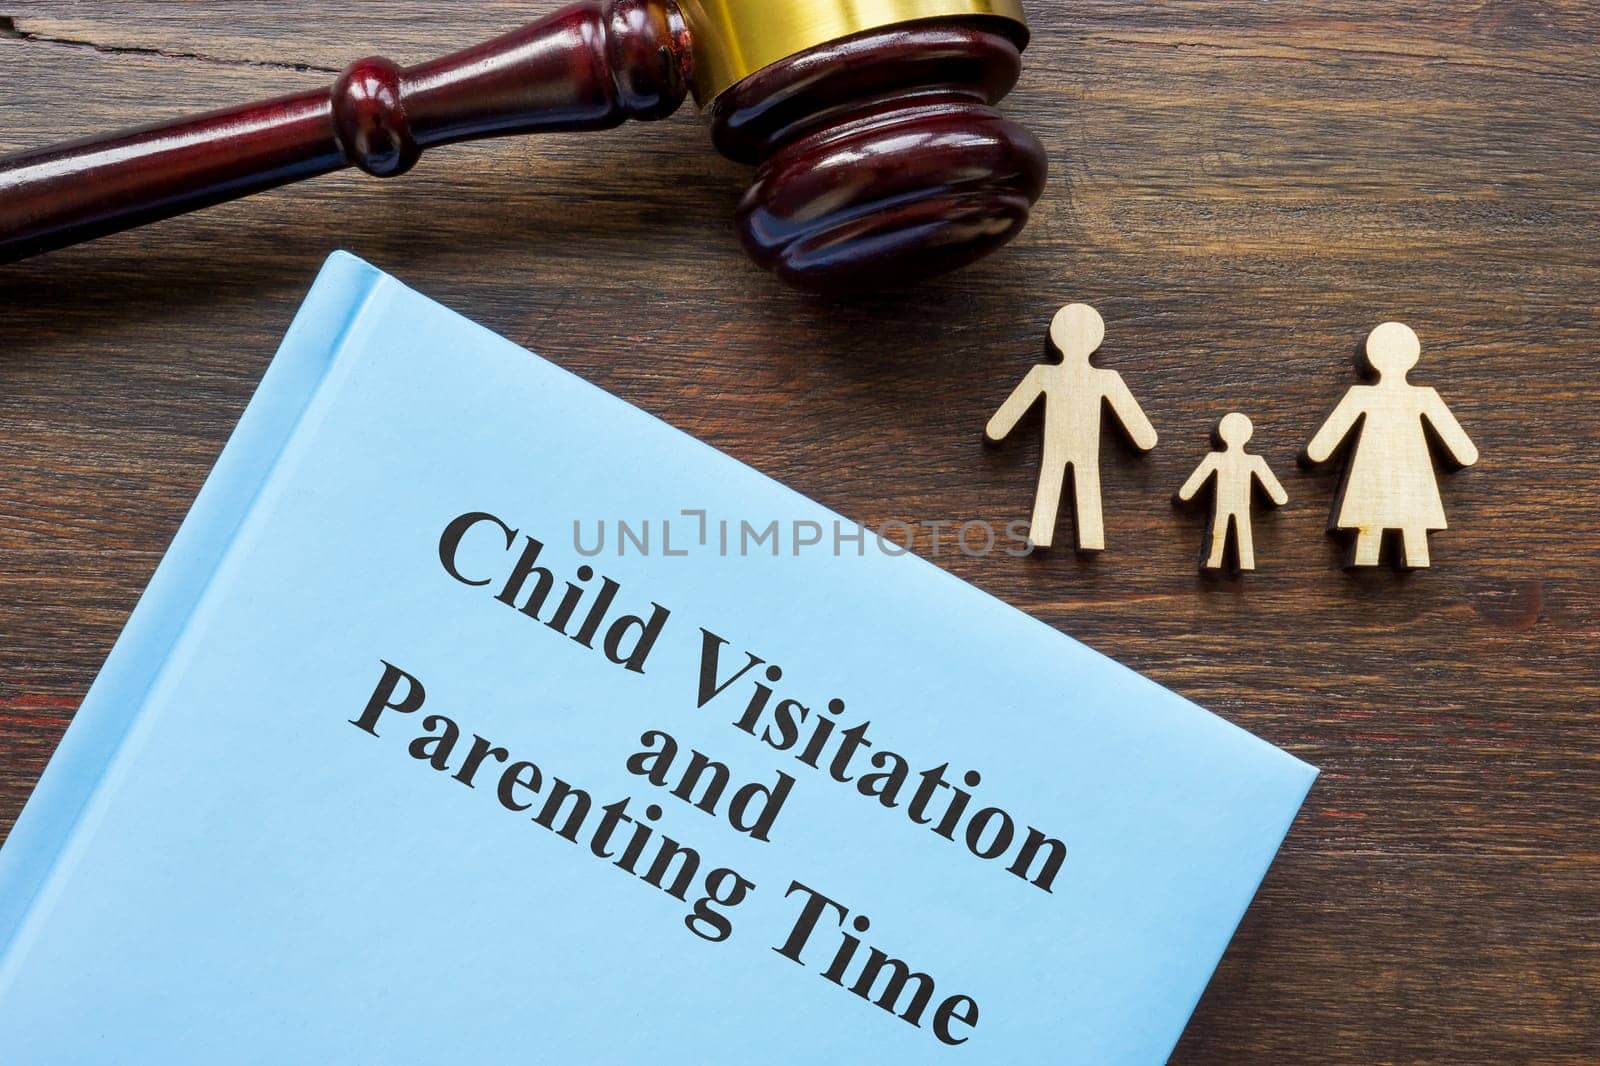 Book child visitation and parenting time and a gavel.